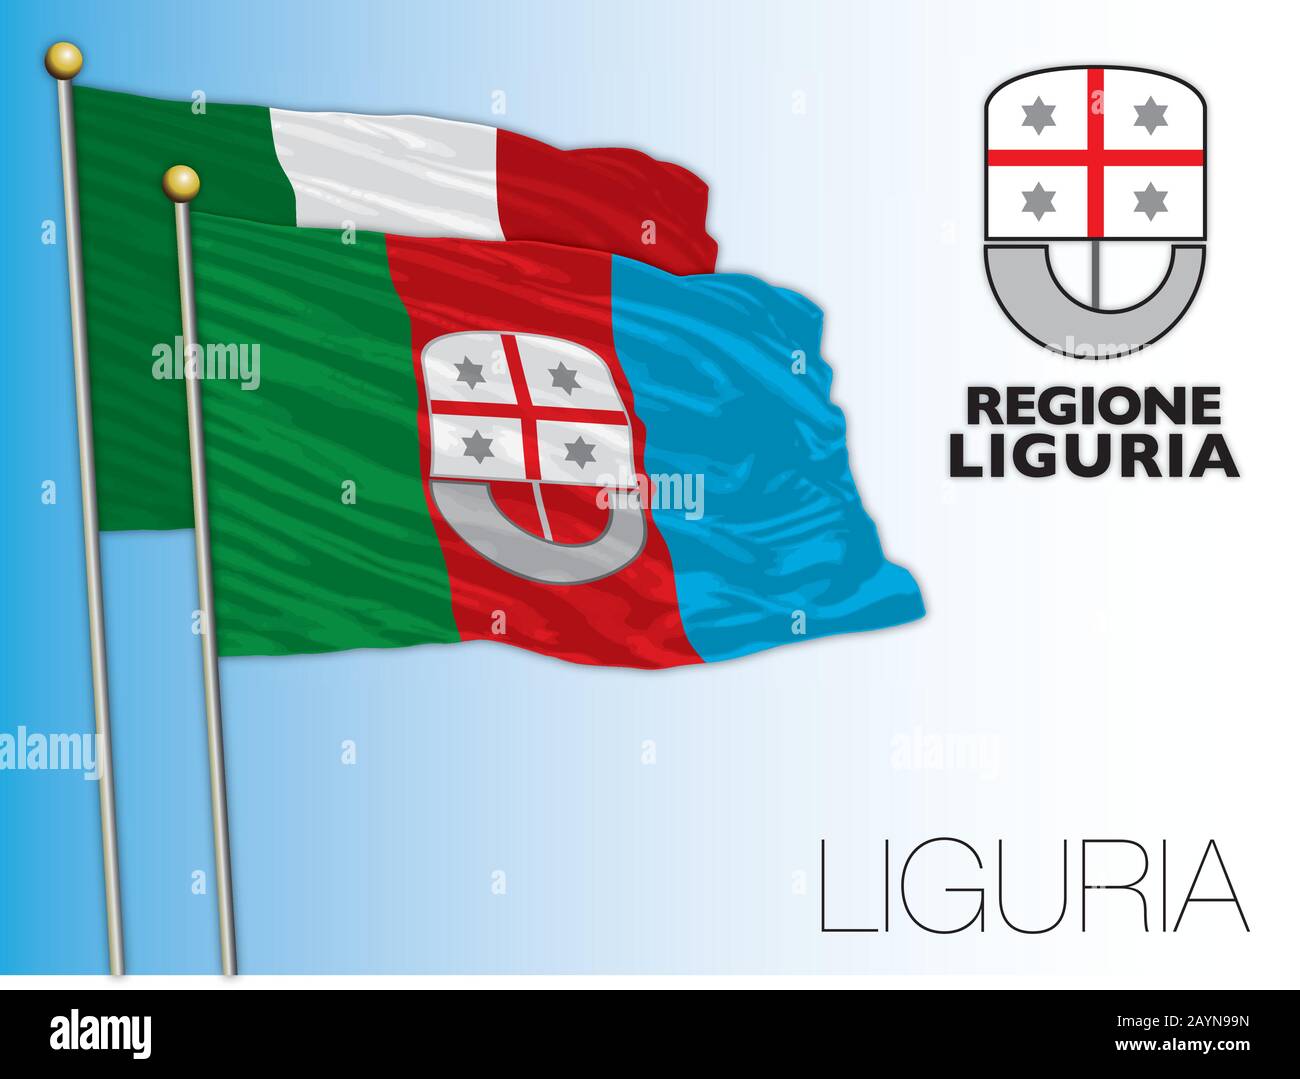 Liguria official regional flag and coat of arms, Italy, vector illustration Stock Vector